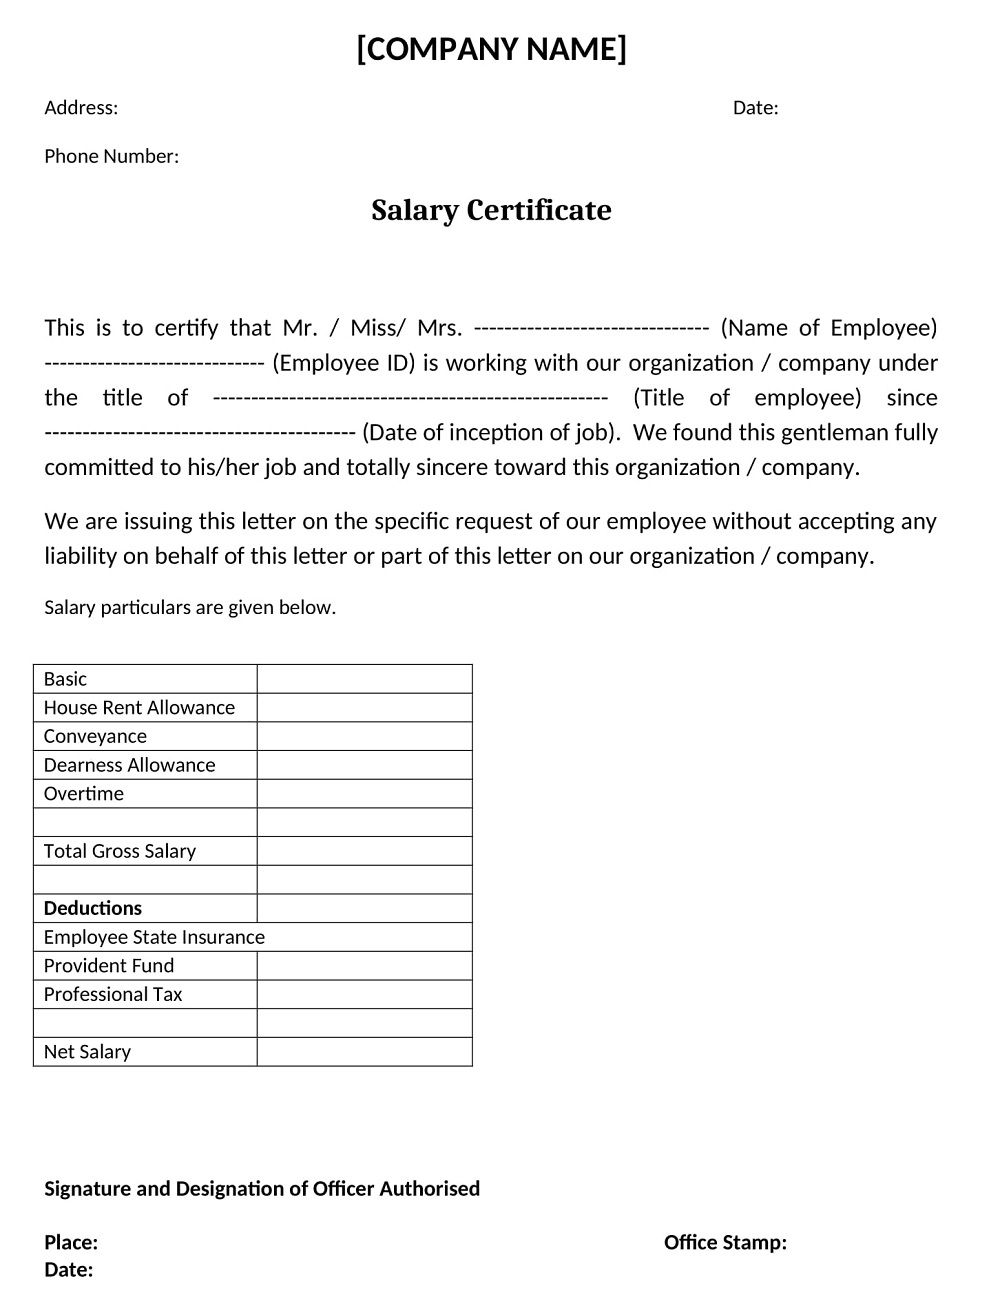 Salary Certificate for Loan